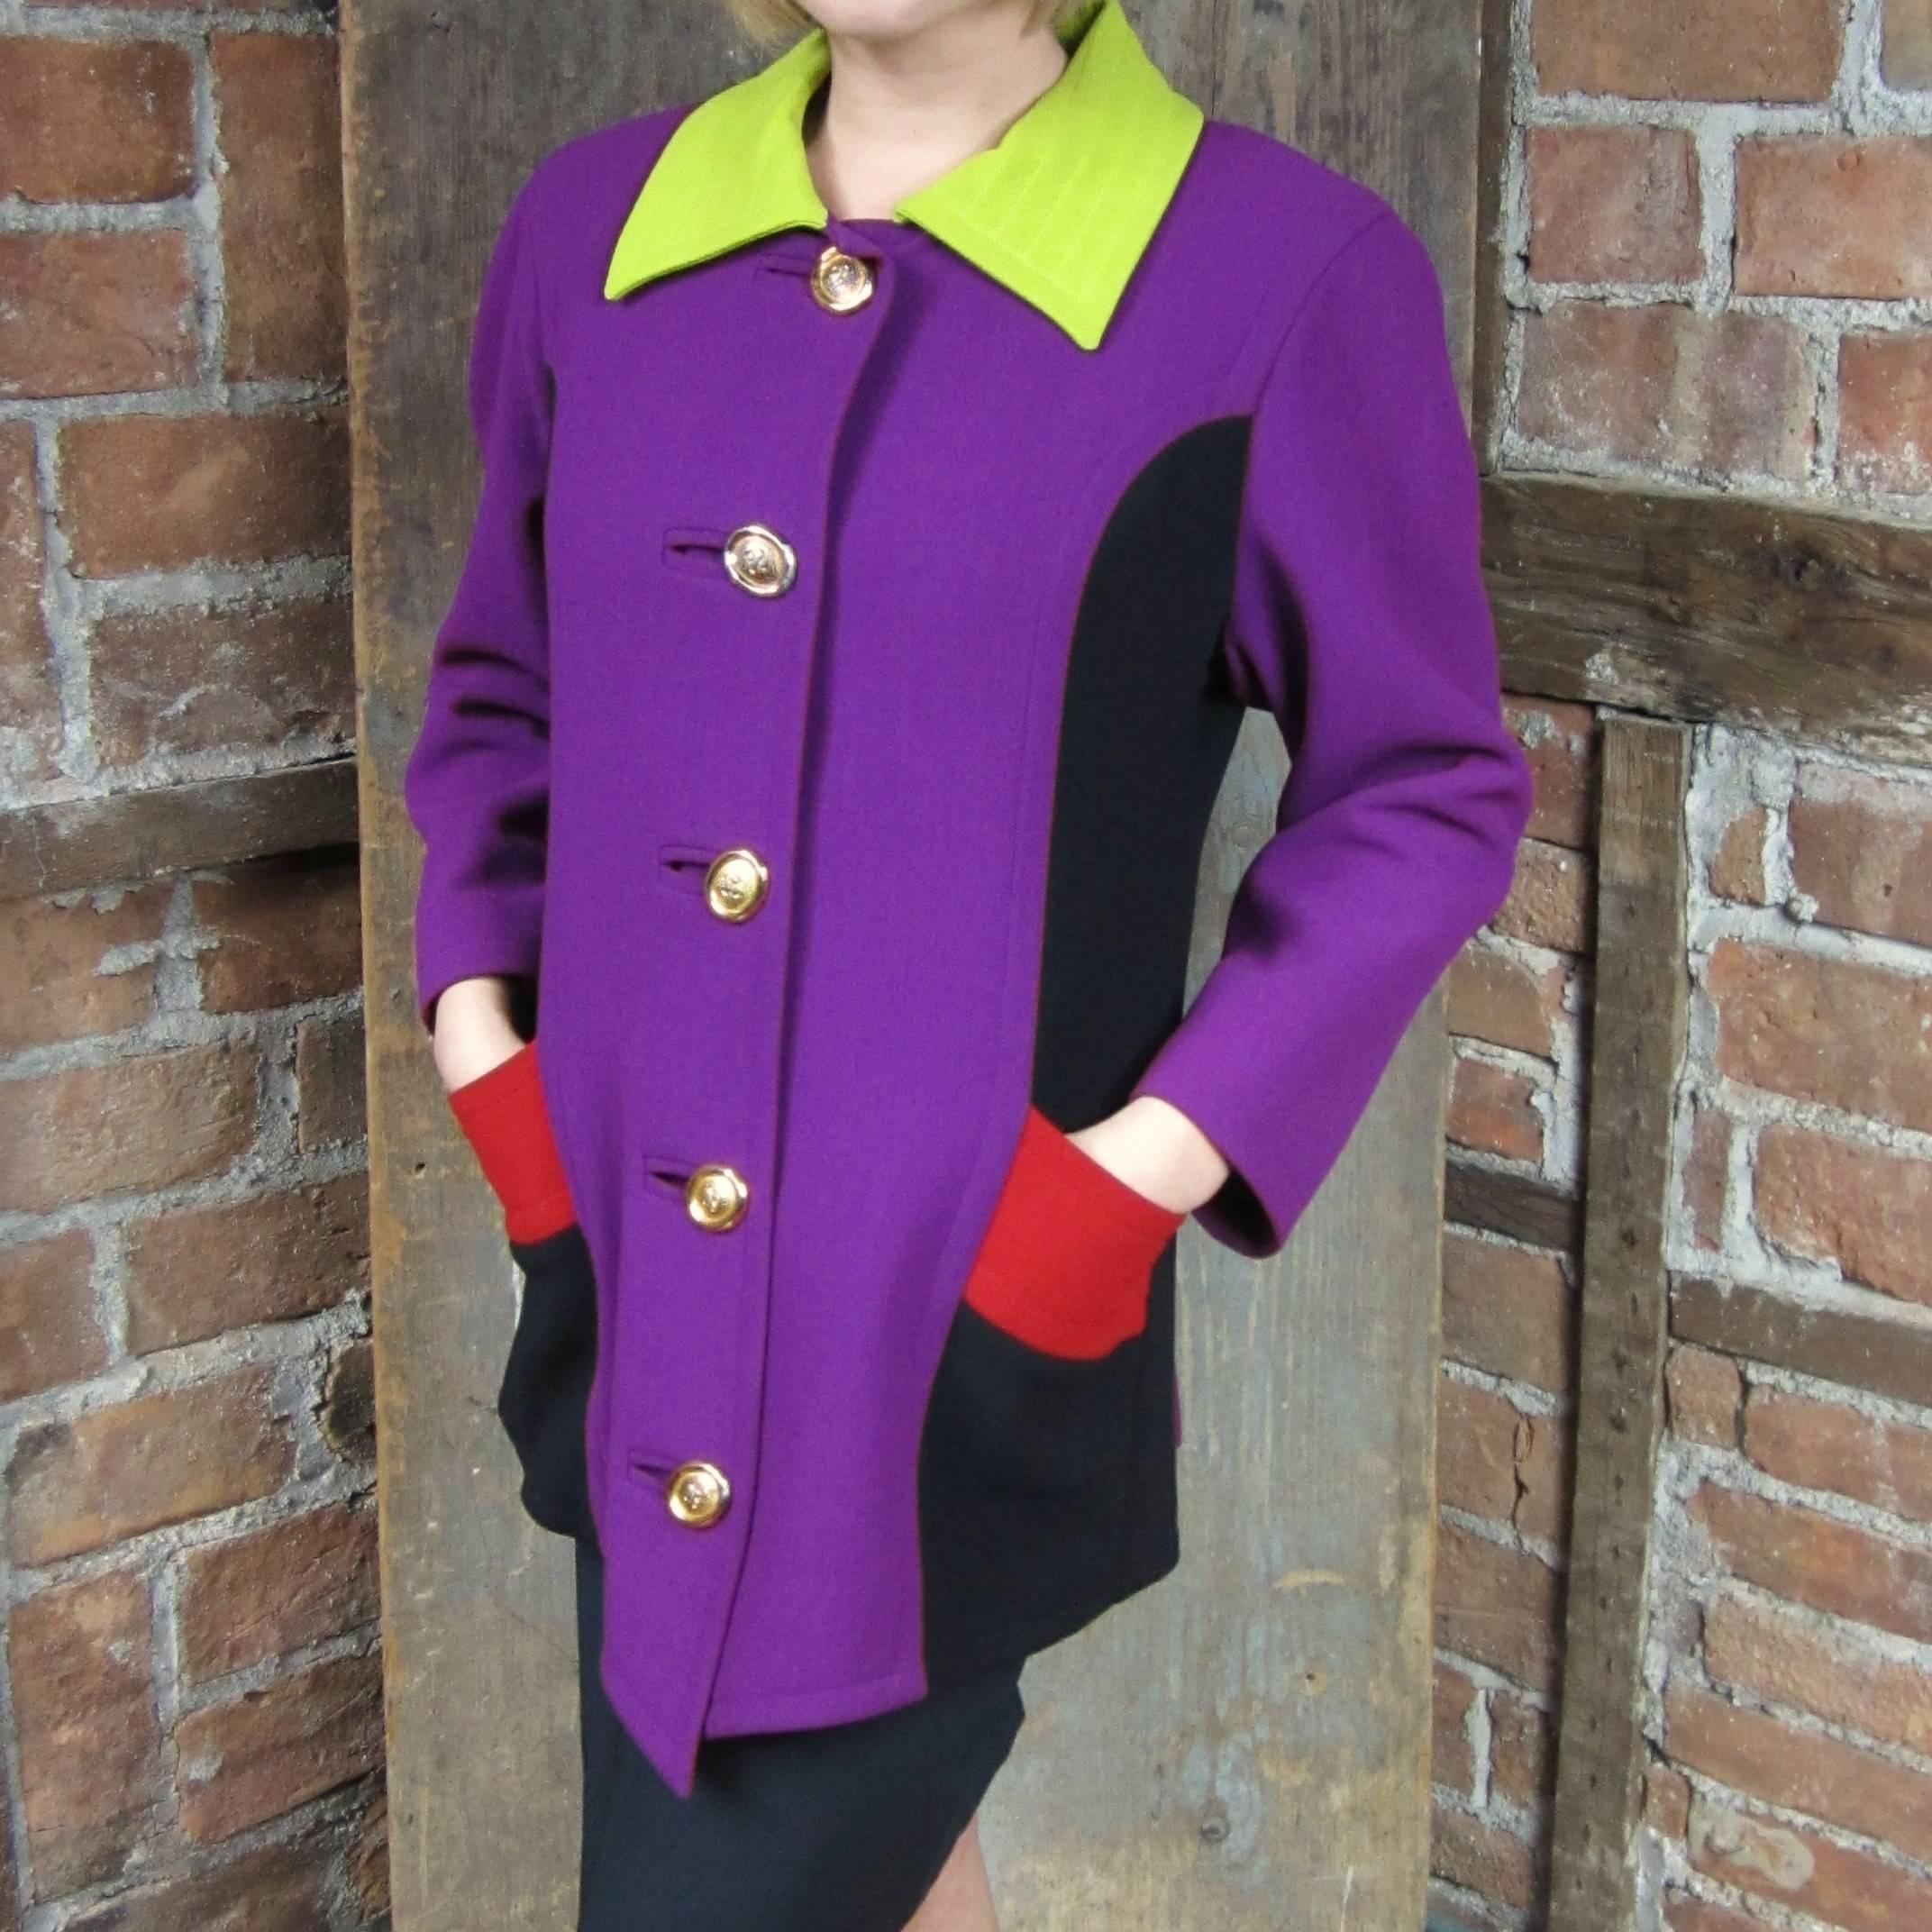 Fantastic Lacroix Jacket with Vibrant Colors Purple, Green & Red Cropped Sleeves
Shoulders 17 inches across the back Bust up to 38 -- Waist 34 -- Across the bottom 40 inches -- Long 28.5 inches -- Sleeve 21 inches. This is out of a massive